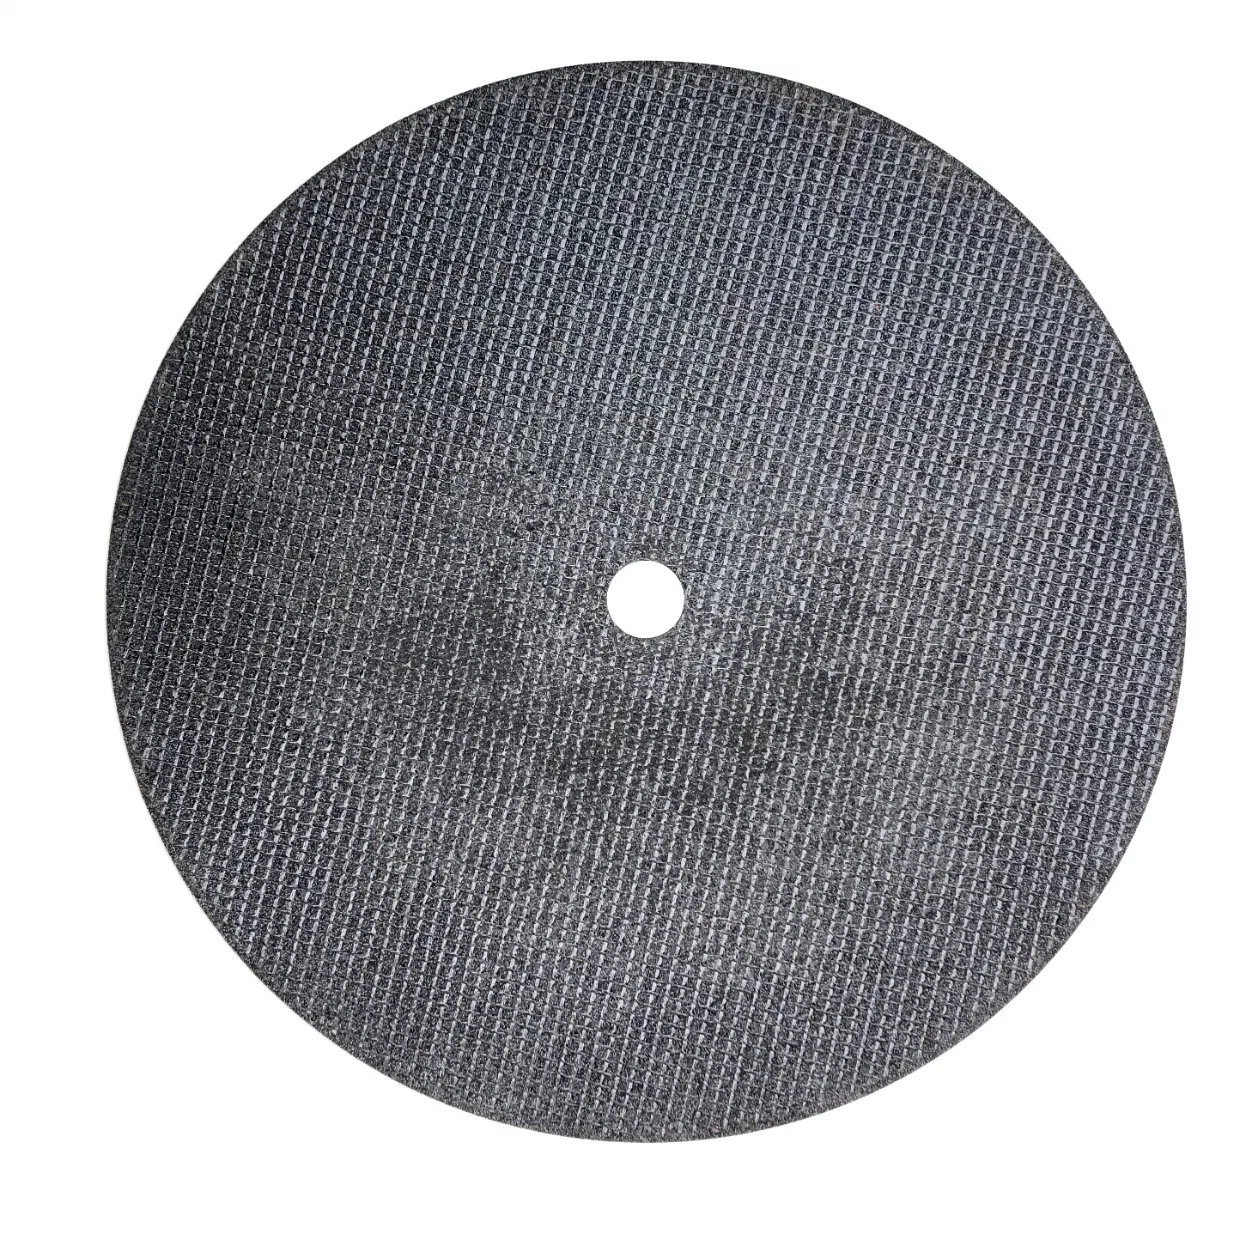 355mm 2nets Cutting Disc Wheel for Metal